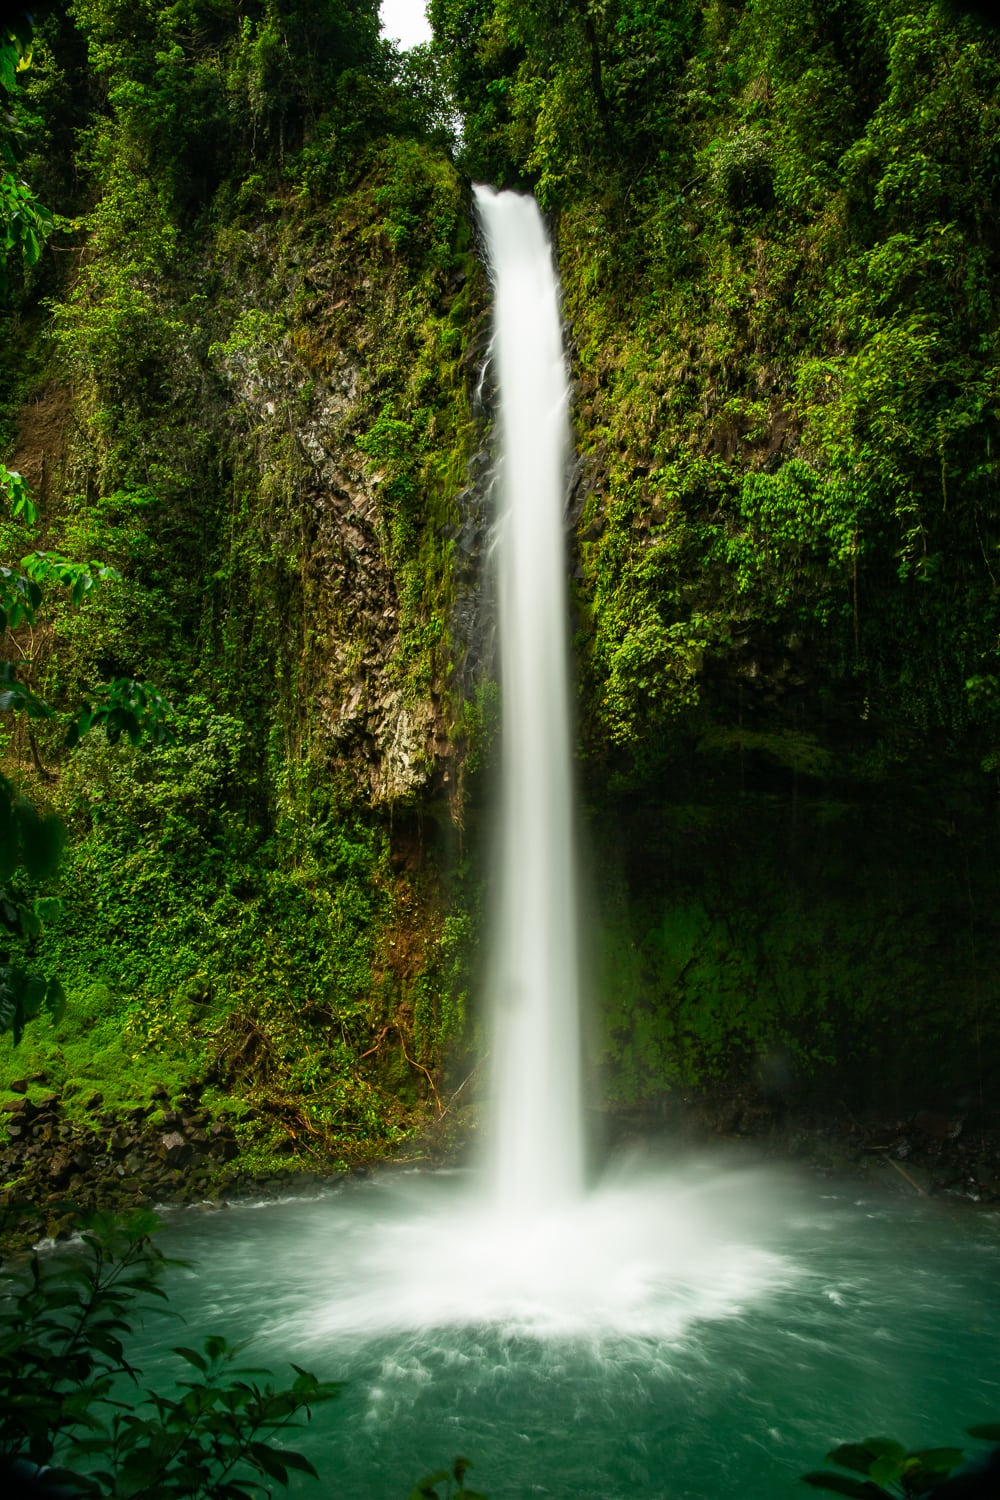 A slow motion photo of La Fortuna falls taken from the viewing platform.